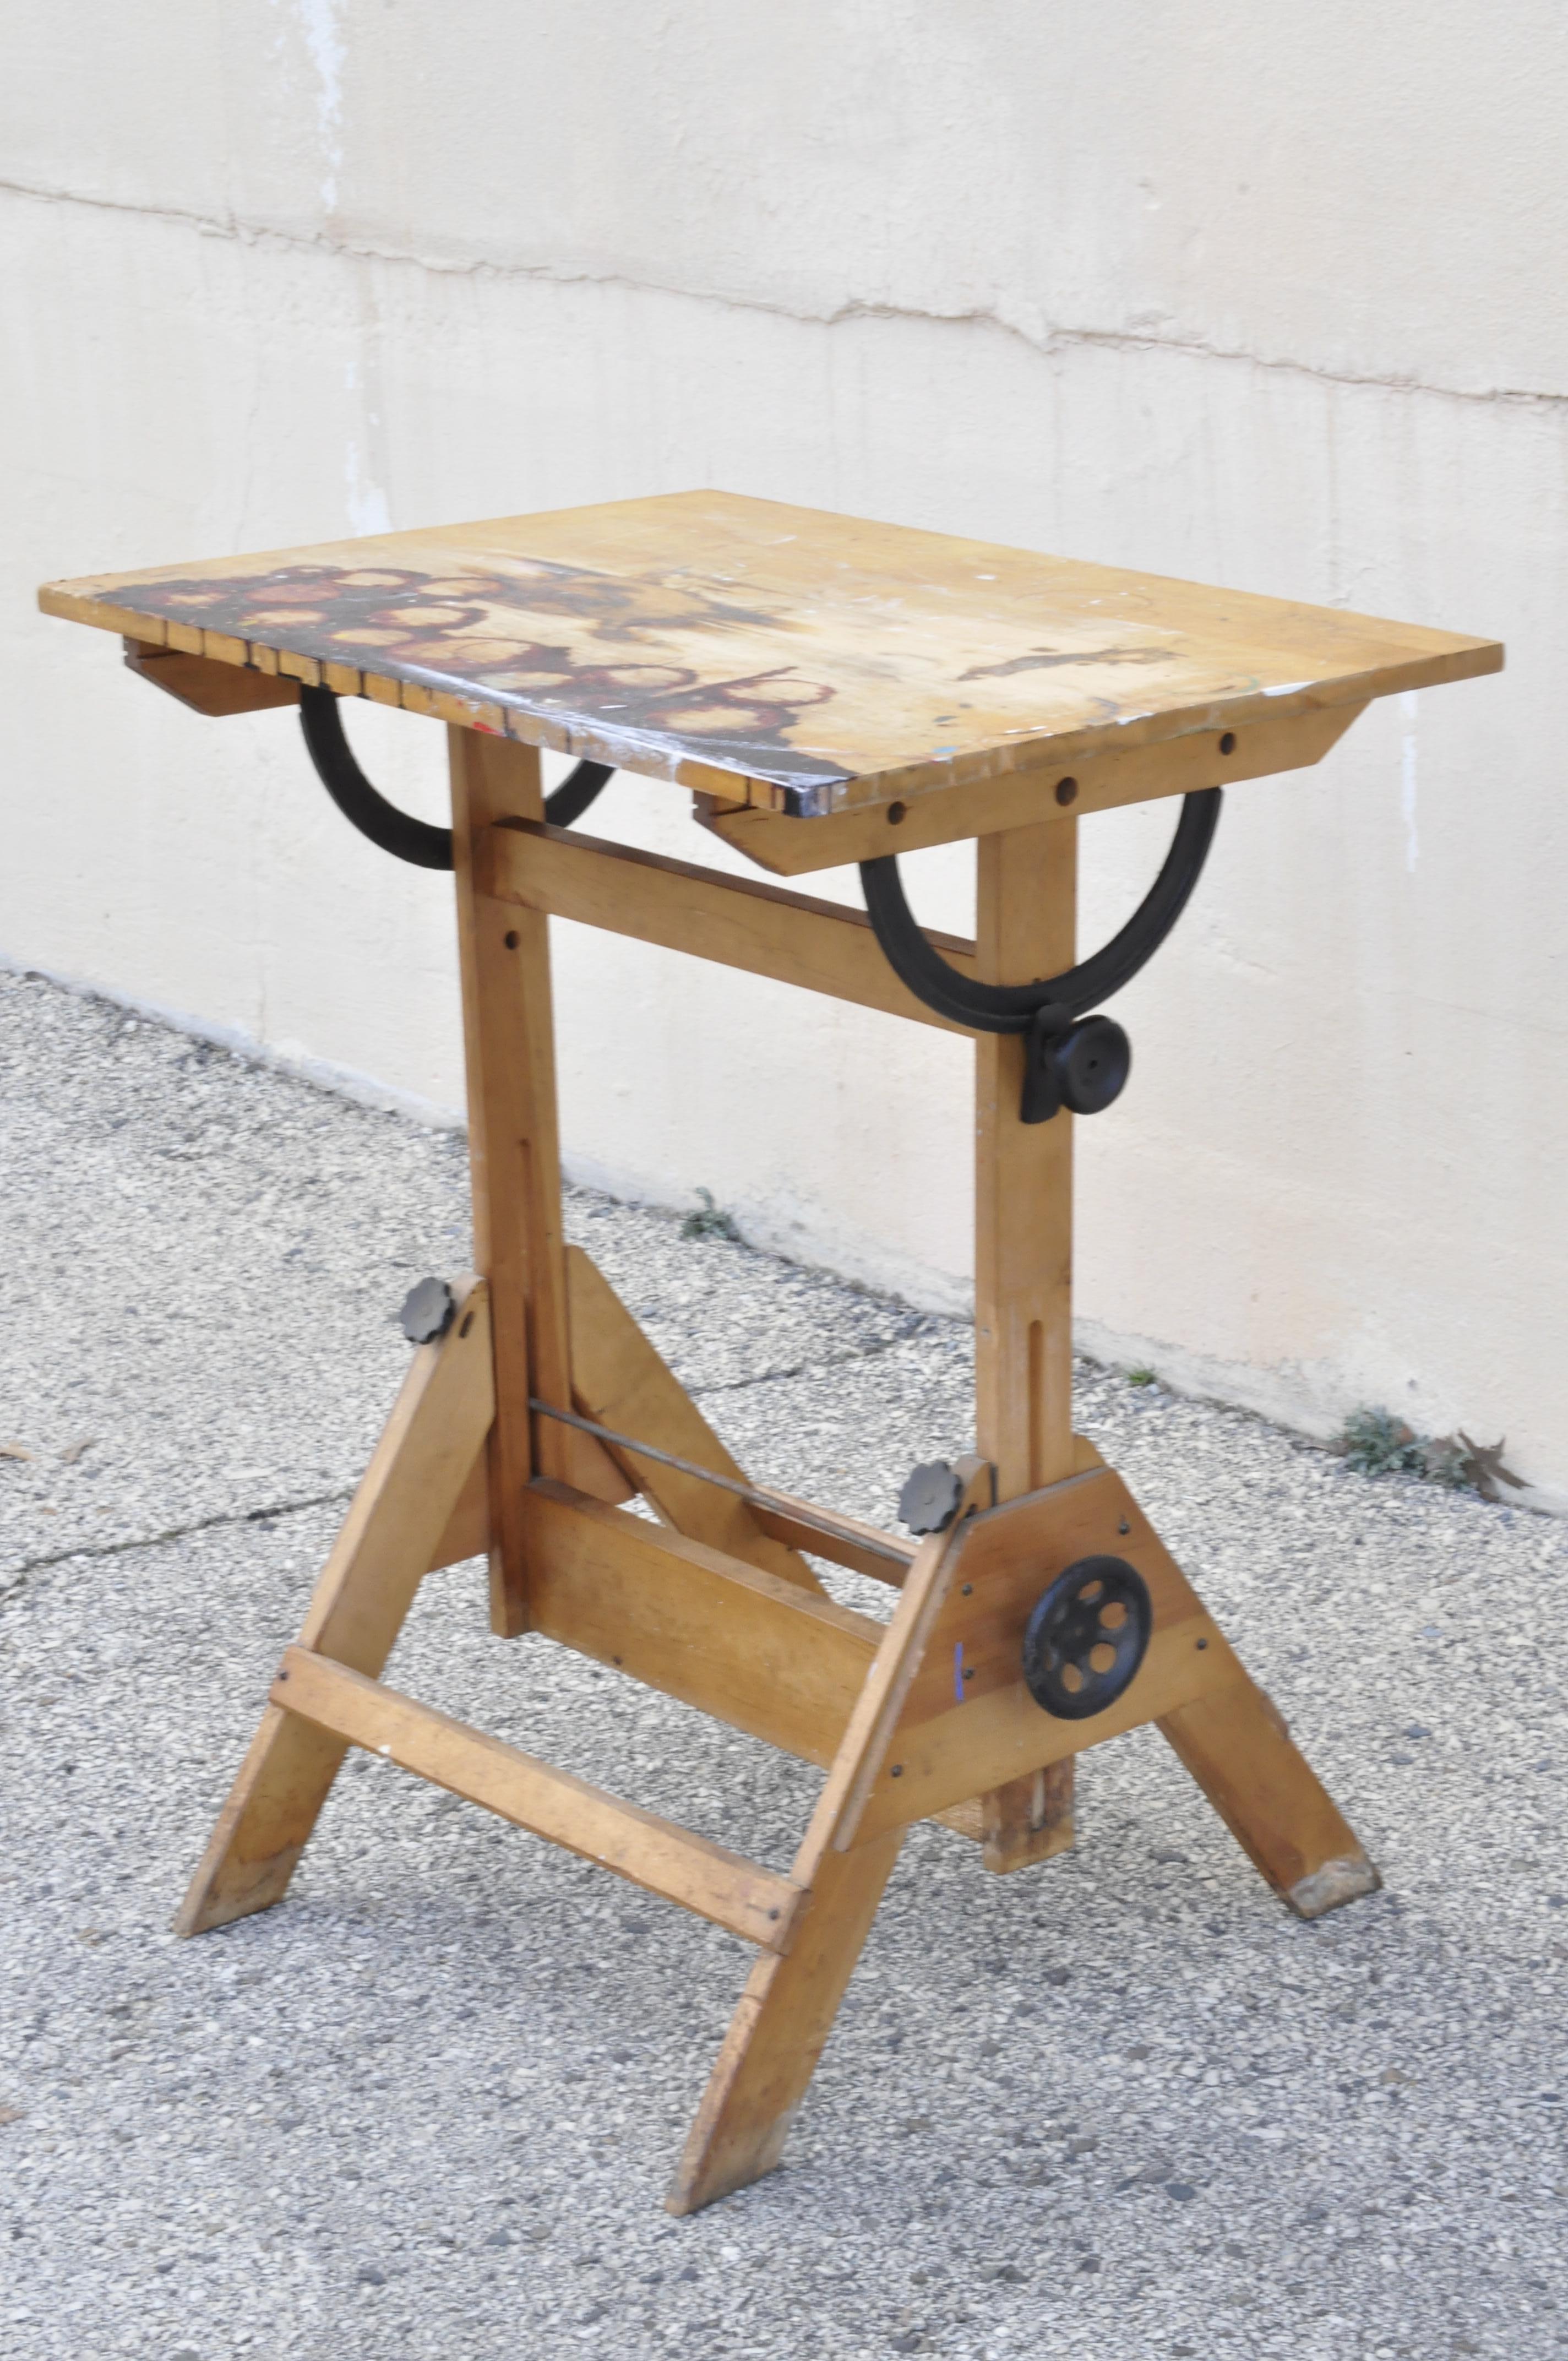 Antique American Industrial Small Drafting Table Work Desk Cast Iron Solid Wood For Sale 2